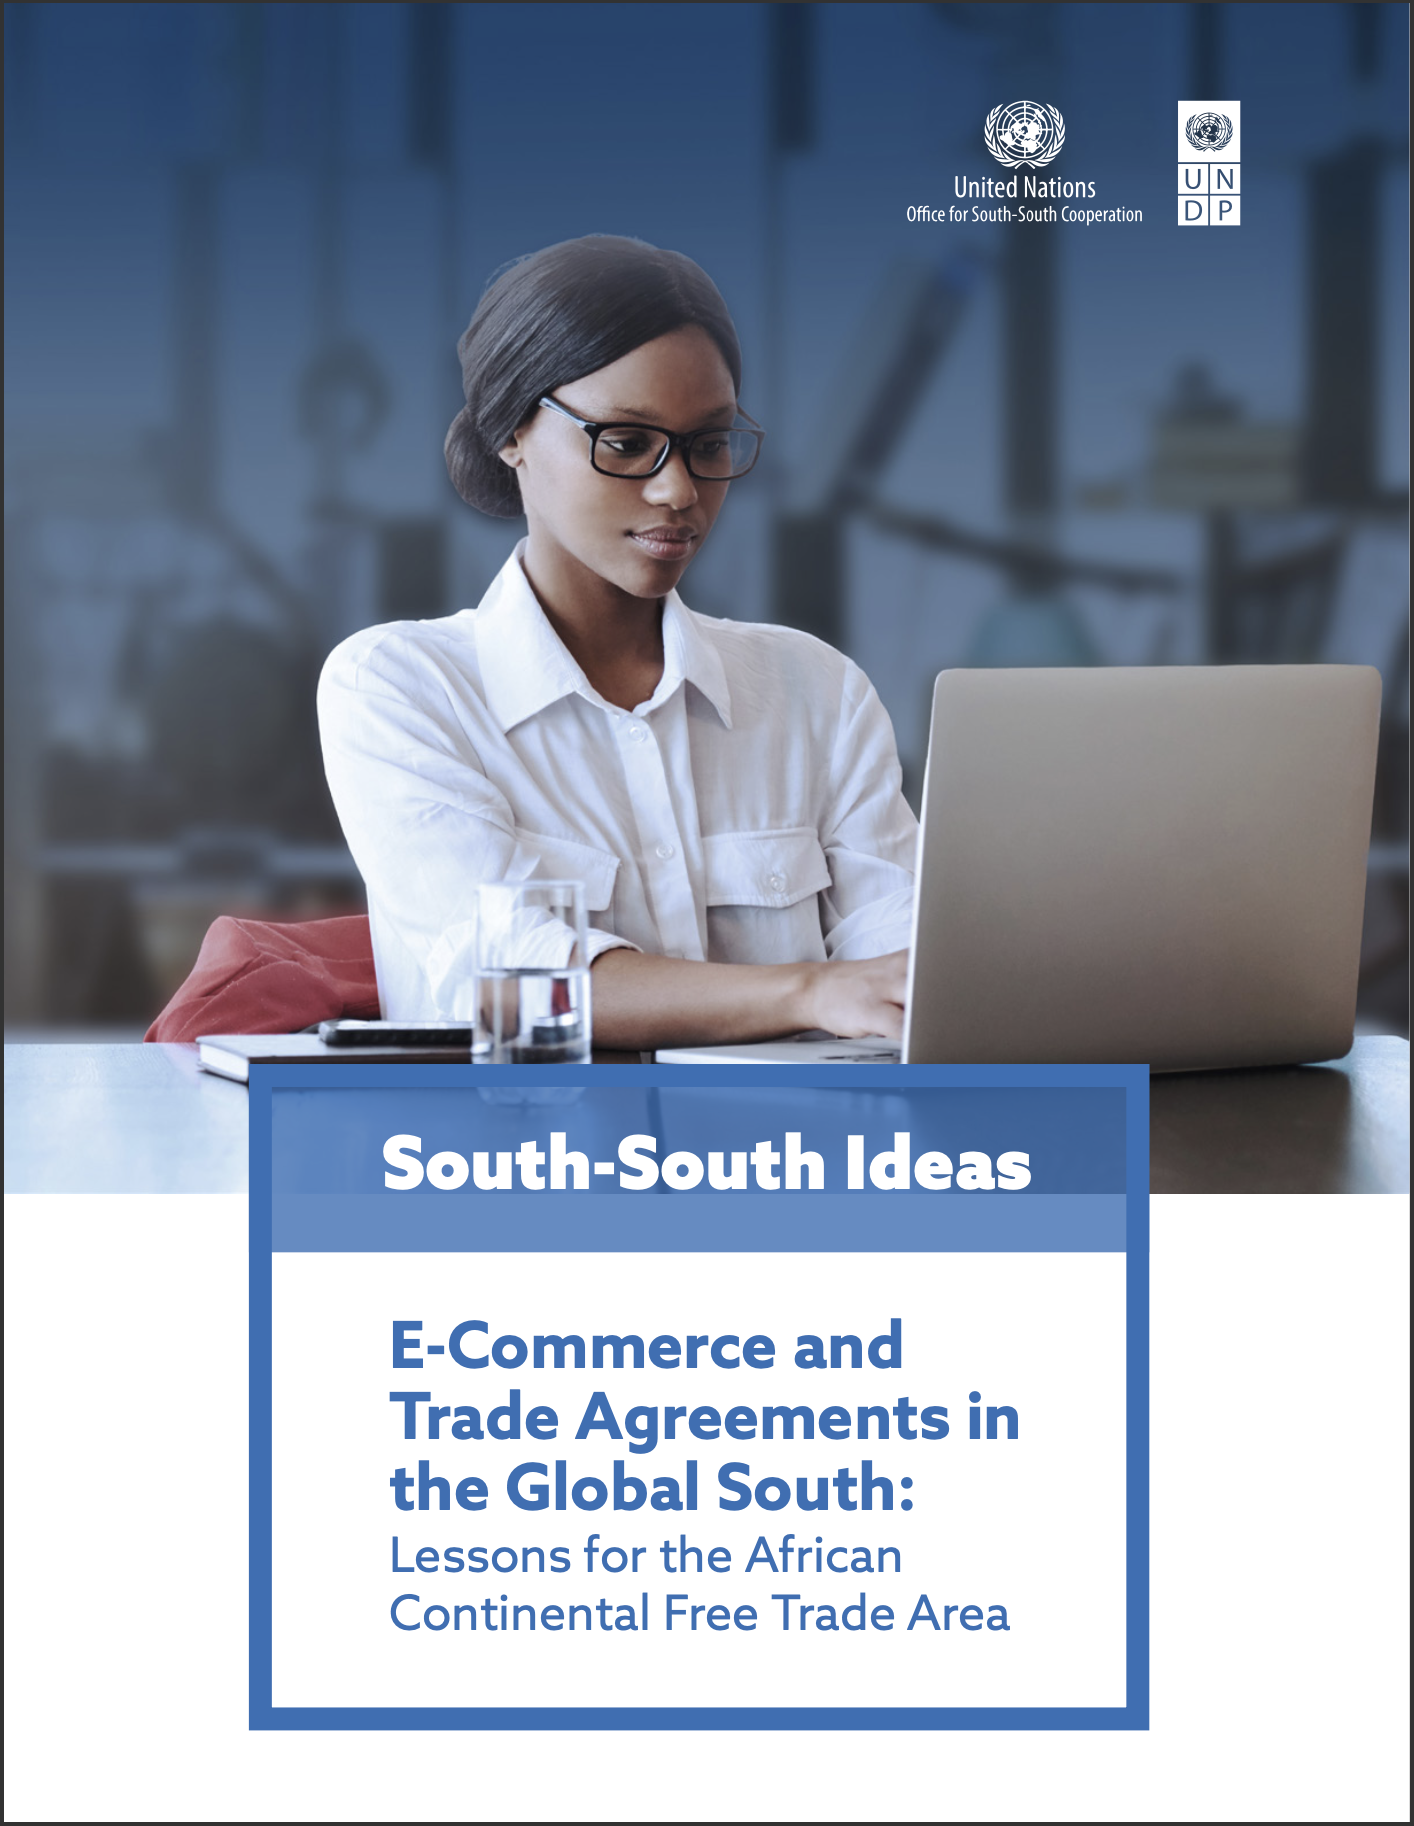 South-South Ideas: E-Commerce and Trade Agreements in the Global South – Lessons from the African Continental Free Trade Agreement